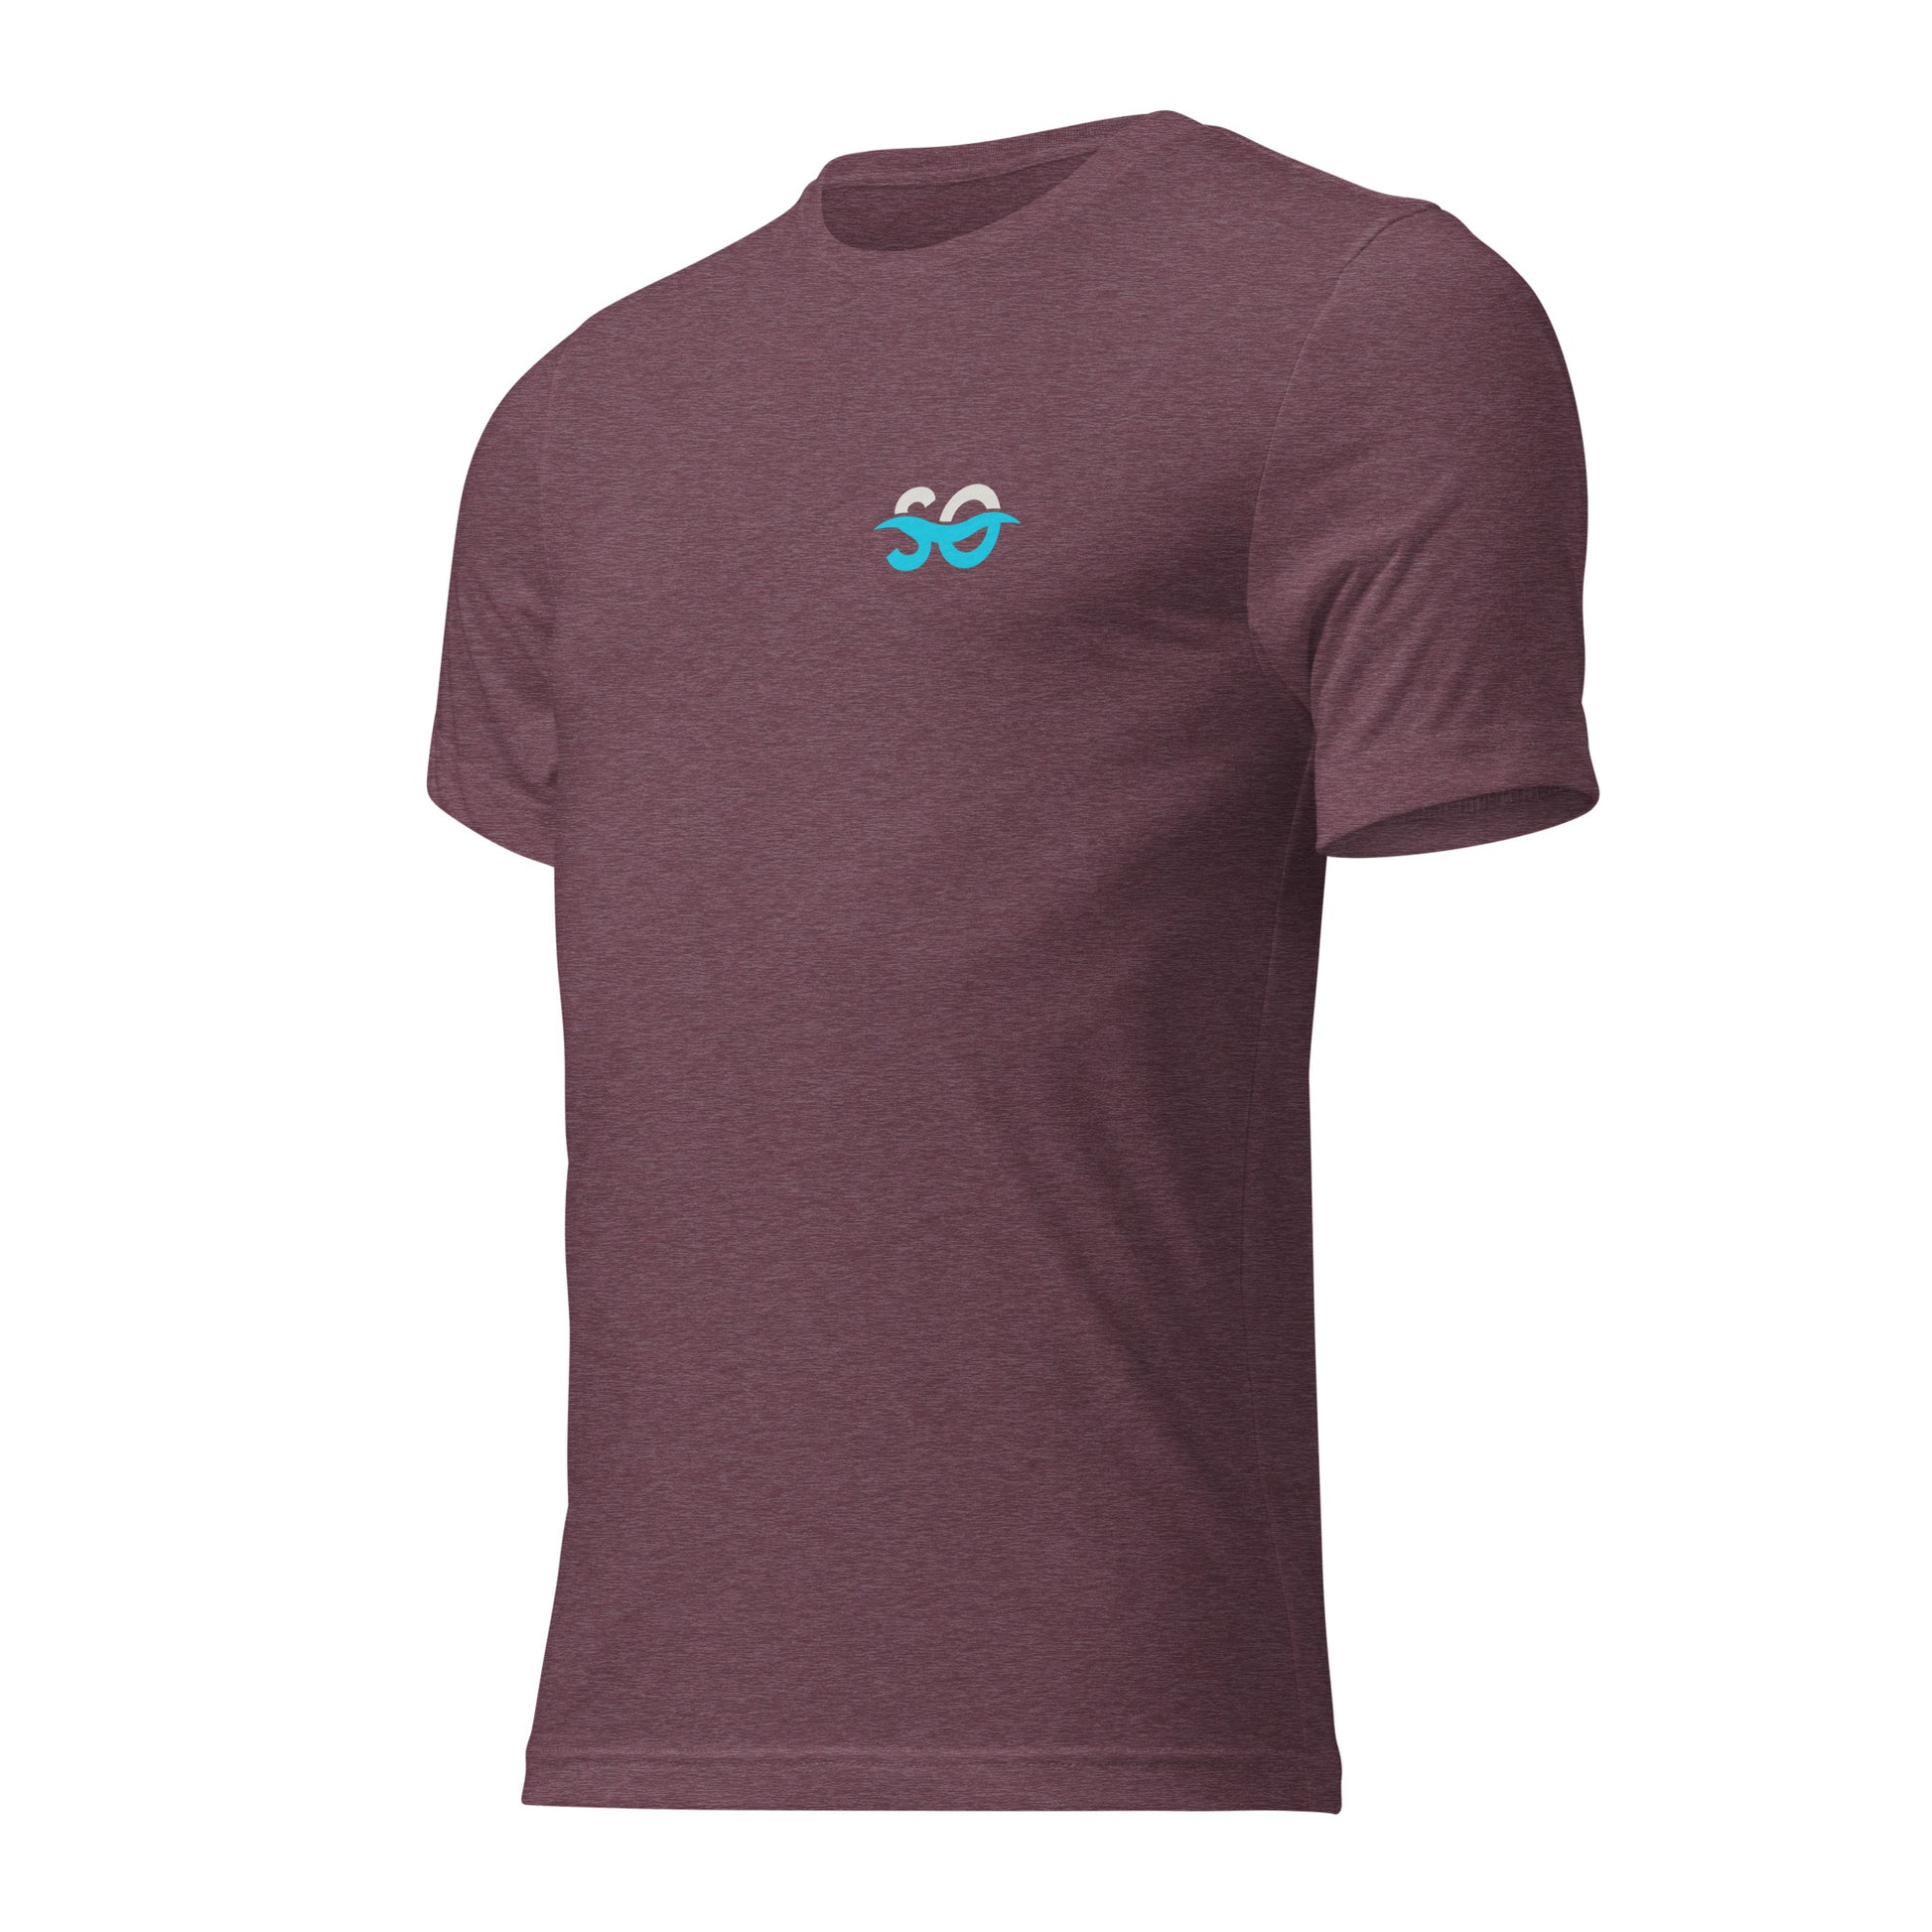 a purple shirt with a blue logo on the chest